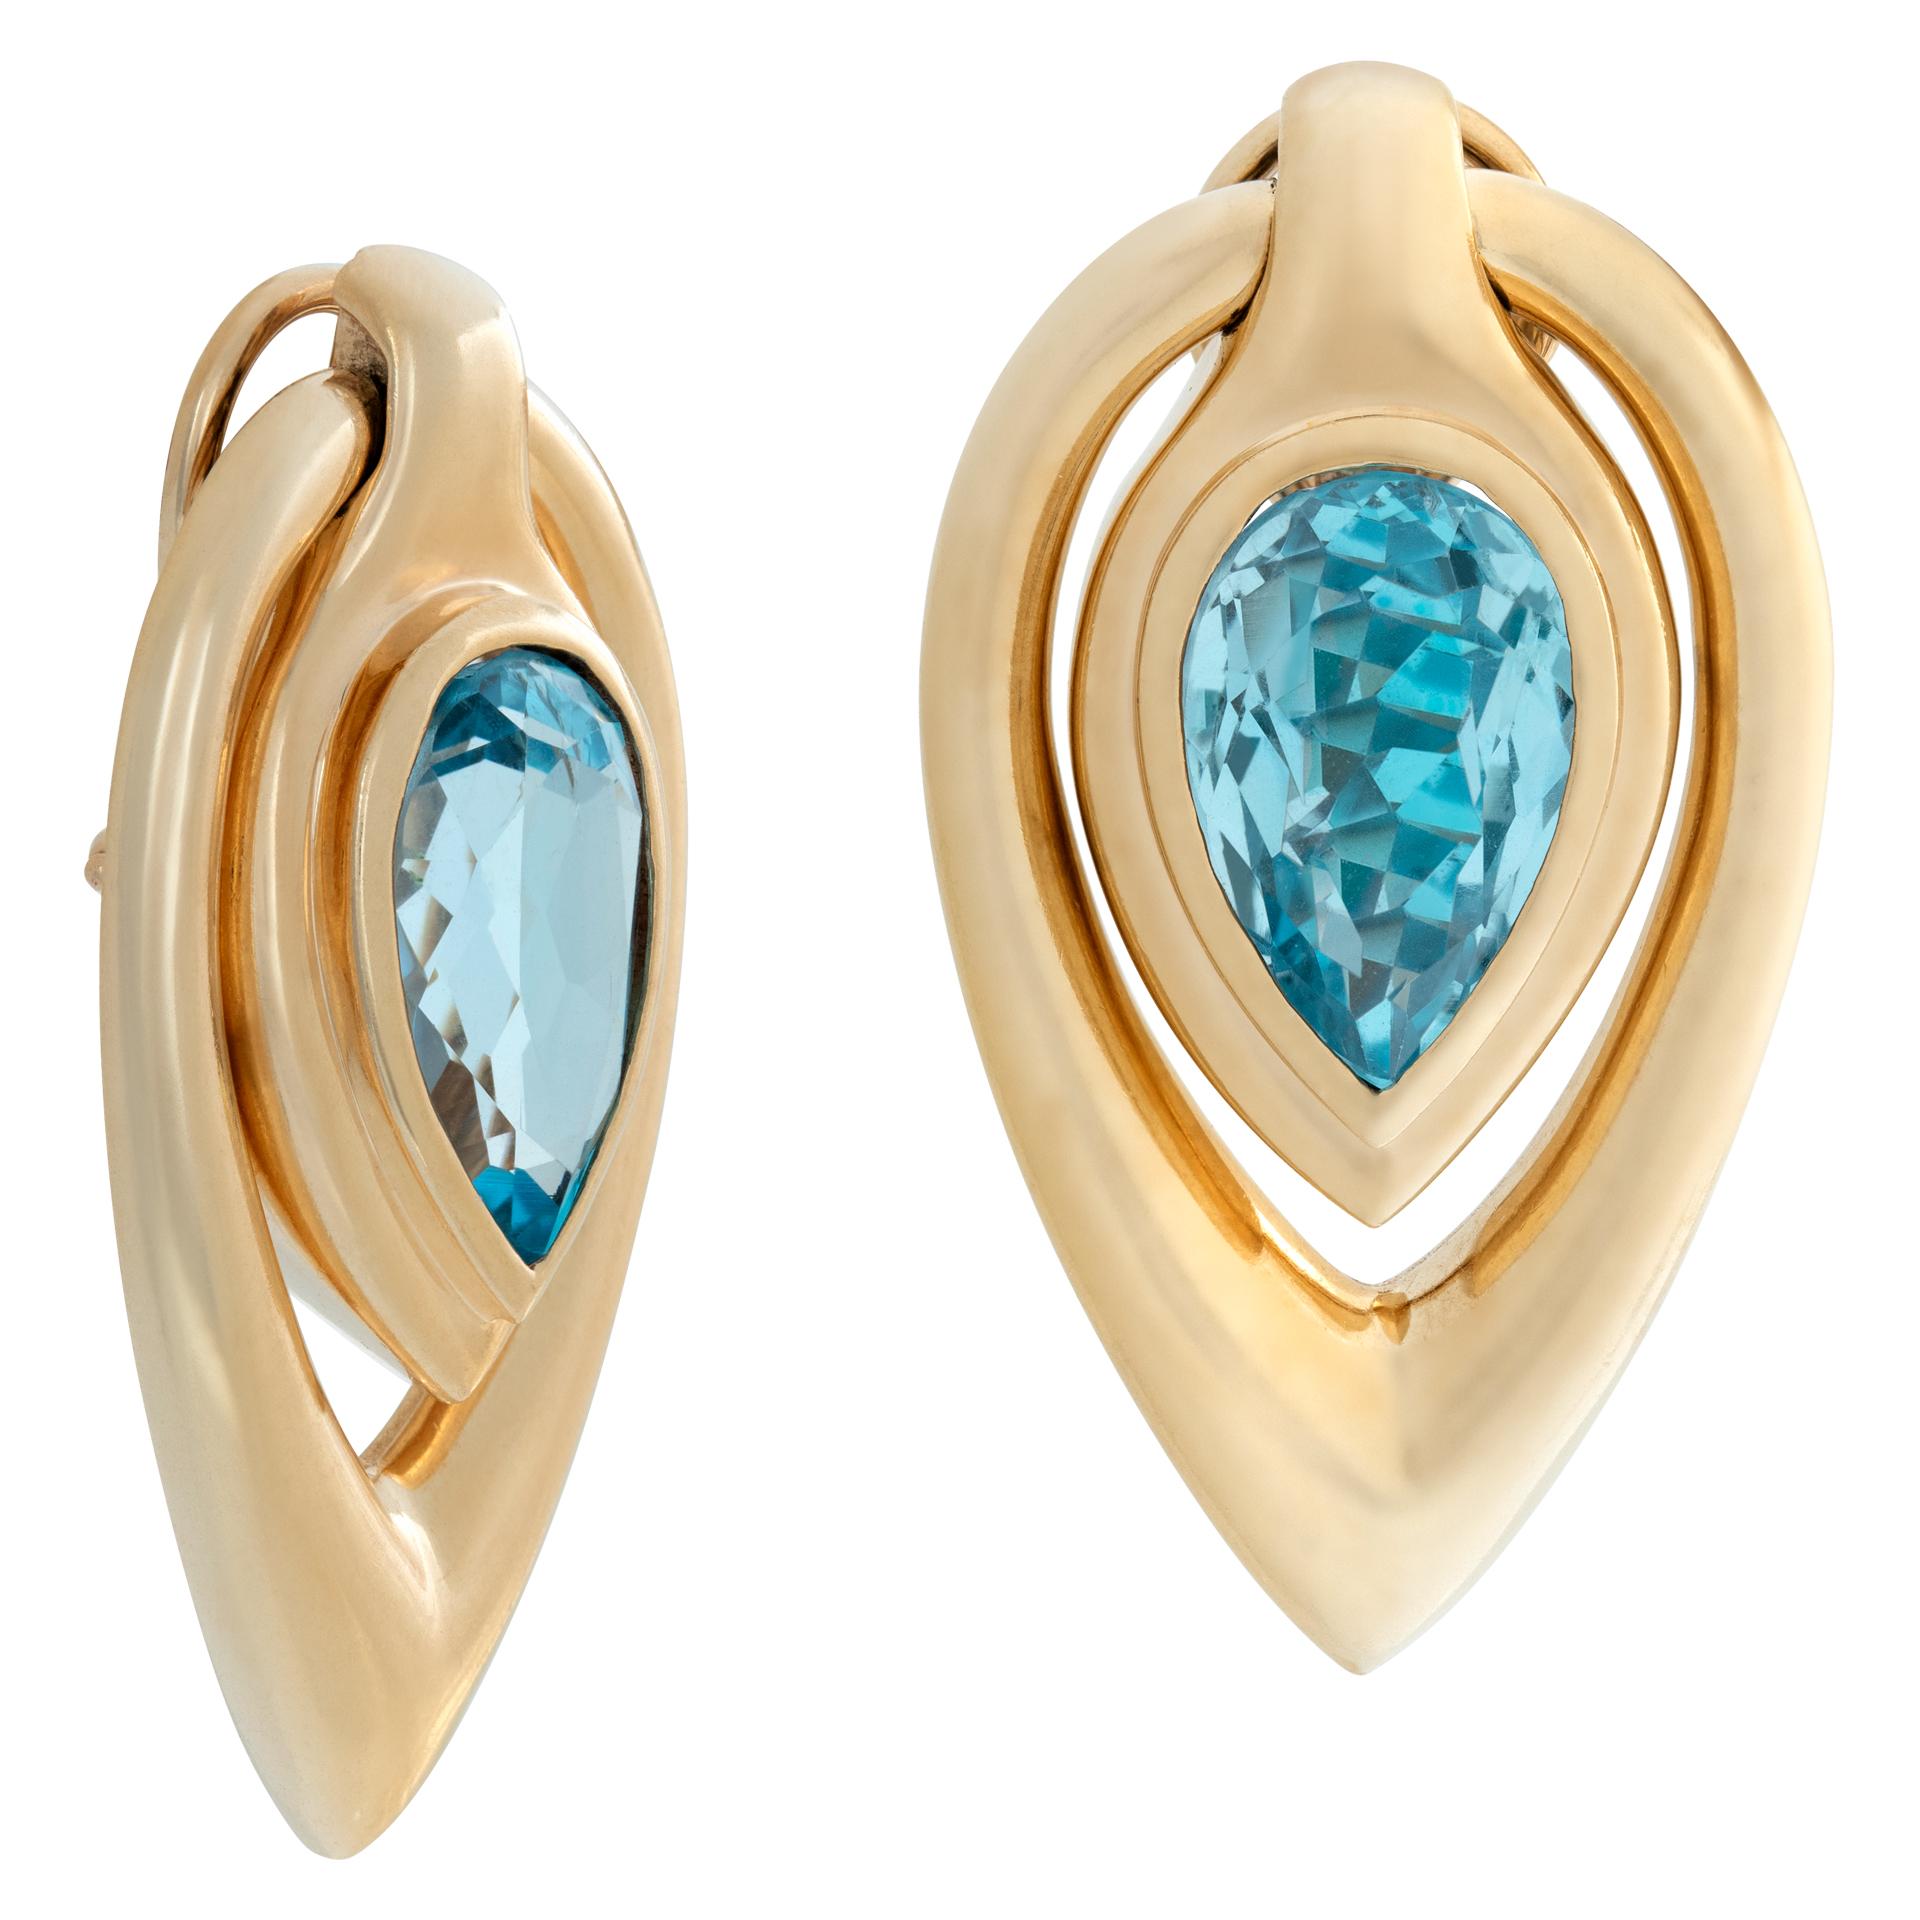 Tear Drop Blue Topaz 14k Yellow Gold Earrings In Excellent Condition For Sale In Surfside, FL